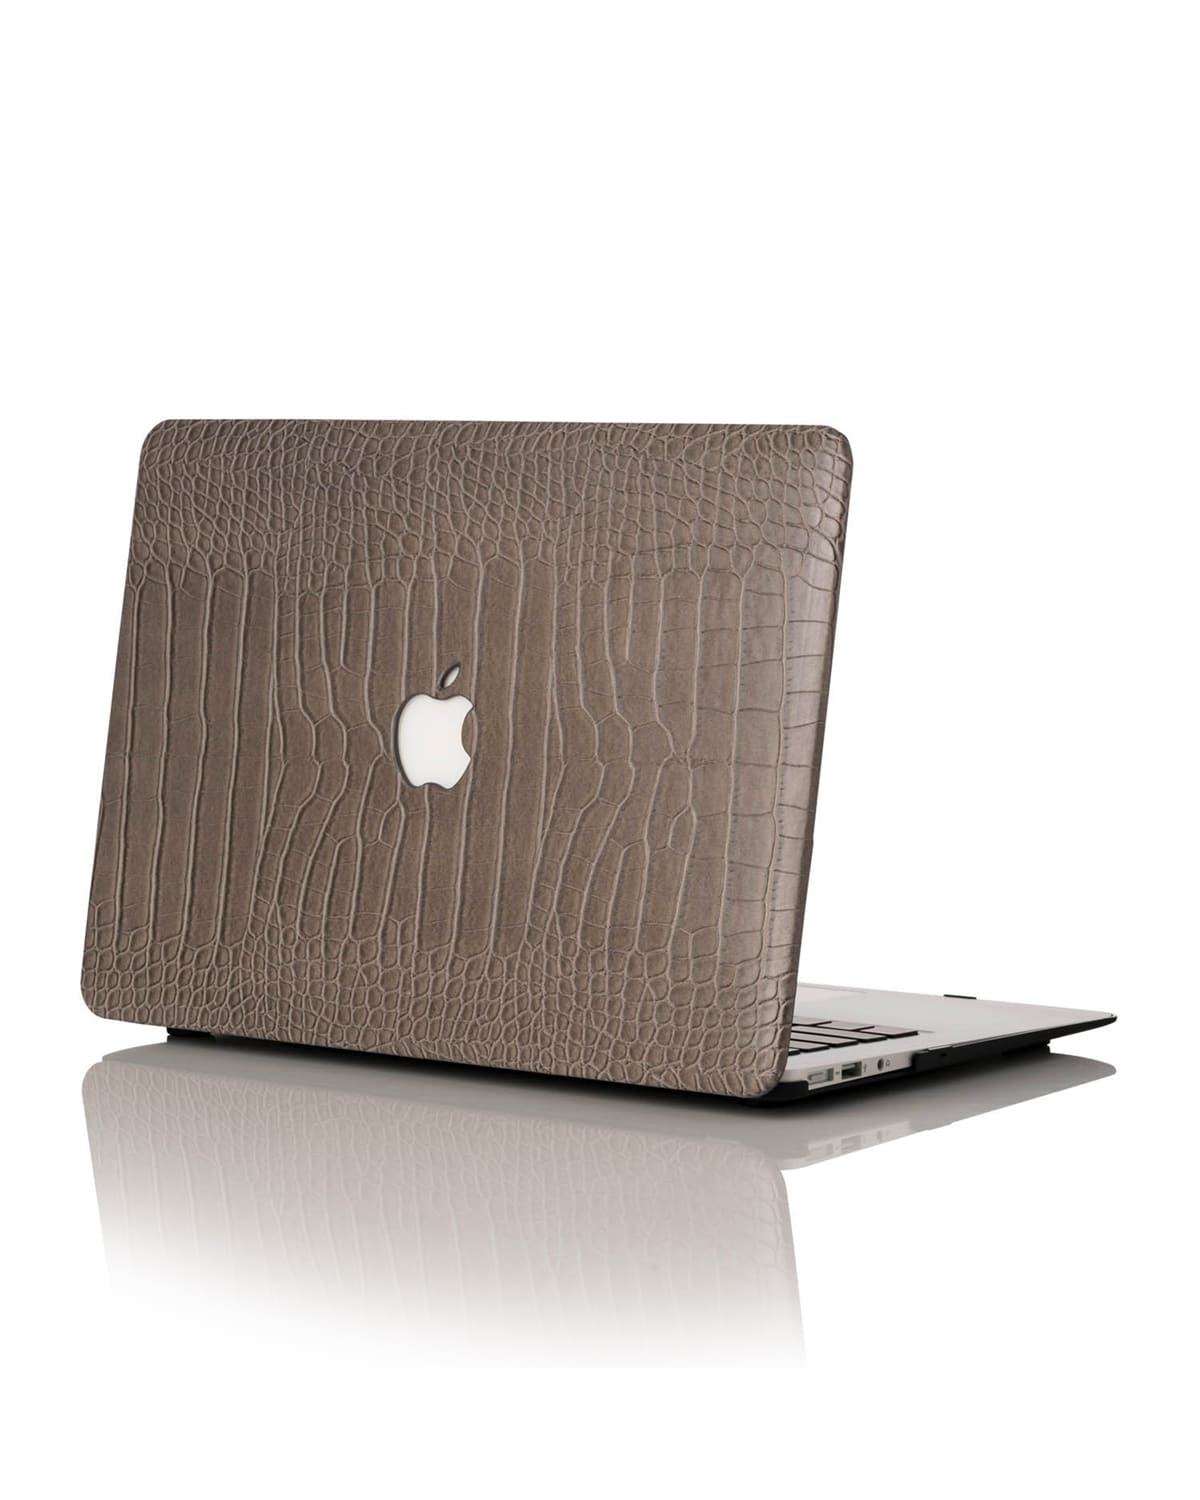 Chic Geeks Faux Crocodile 13" New Macbook Air Case (model Number A1932) In Greyson